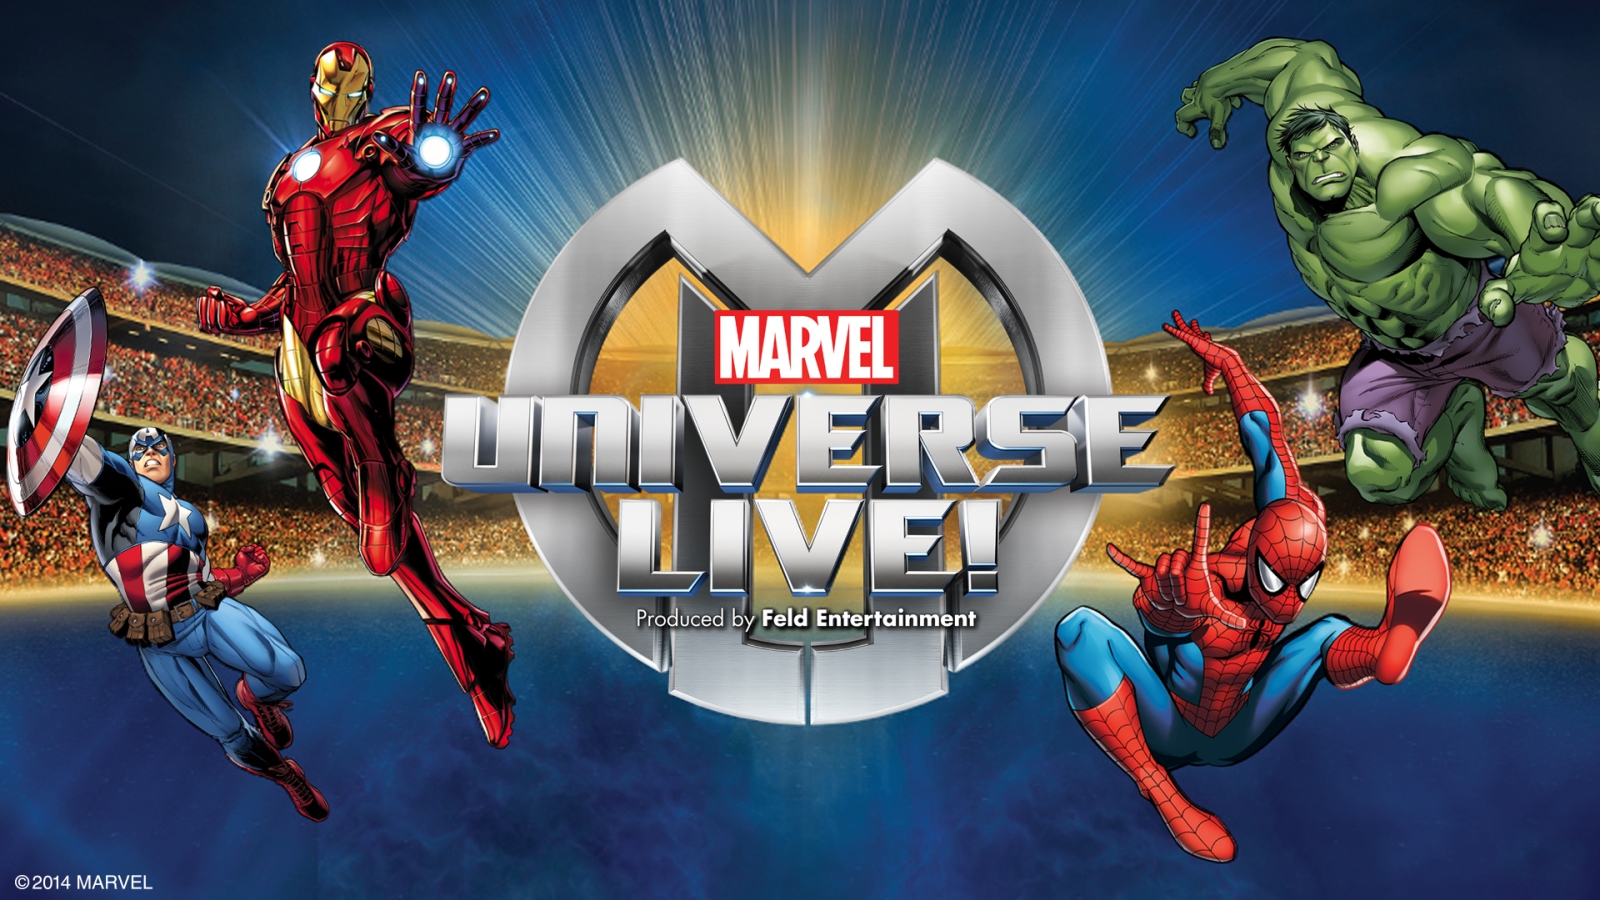 Marvel Universe Live Performers Auditions for 2017